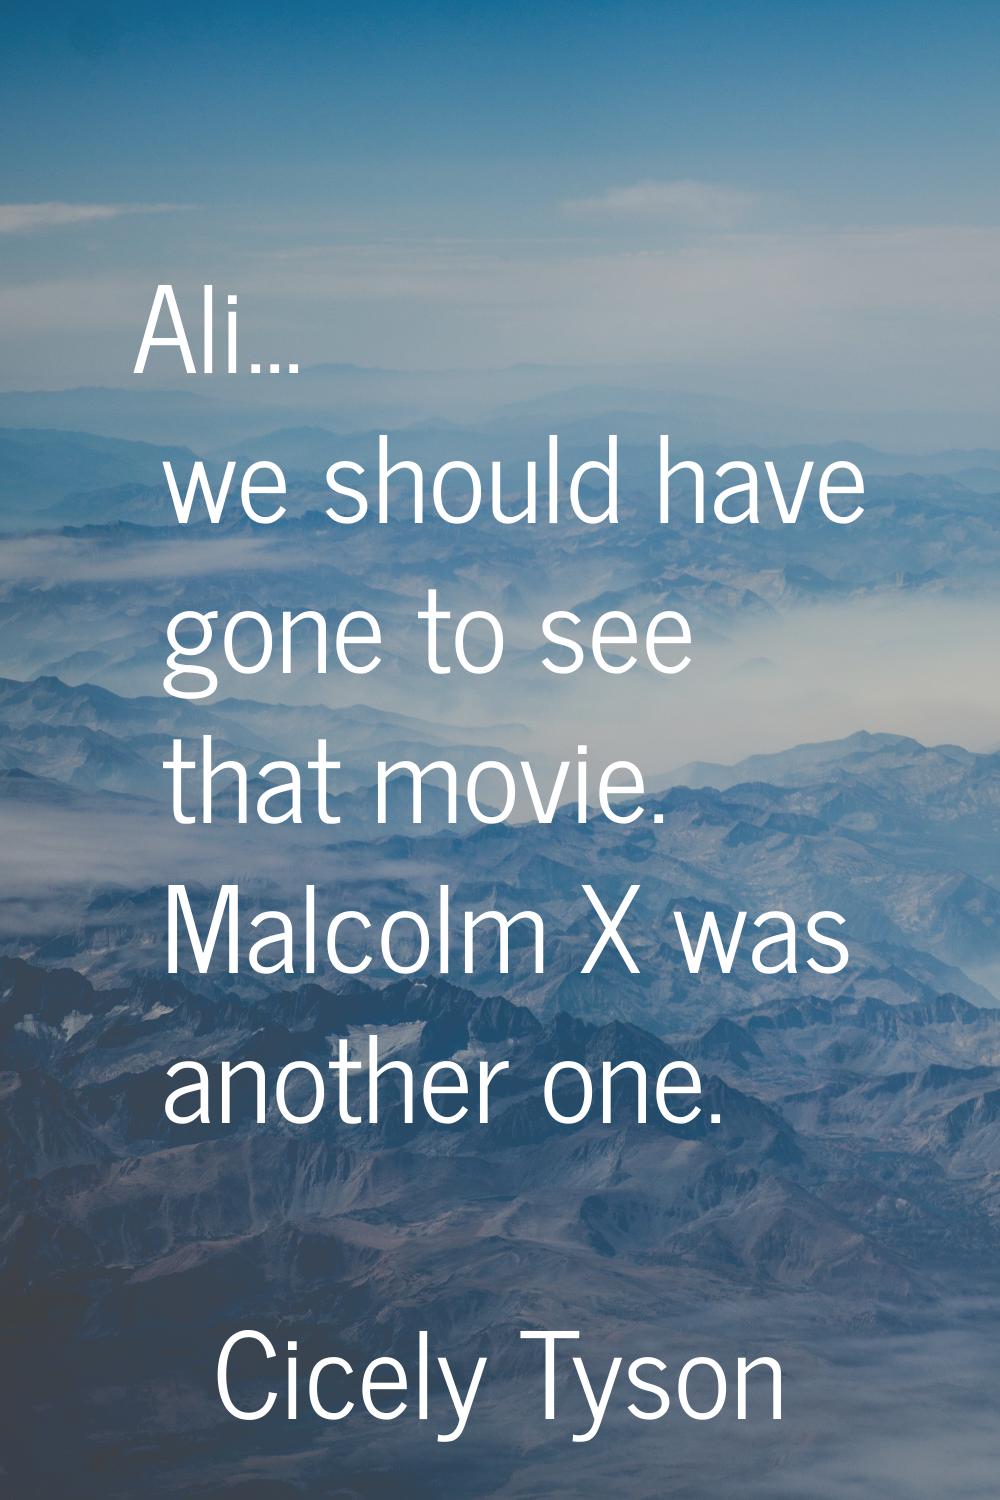 Ali... we should have gone to see that movie. Malcolm X was another one.